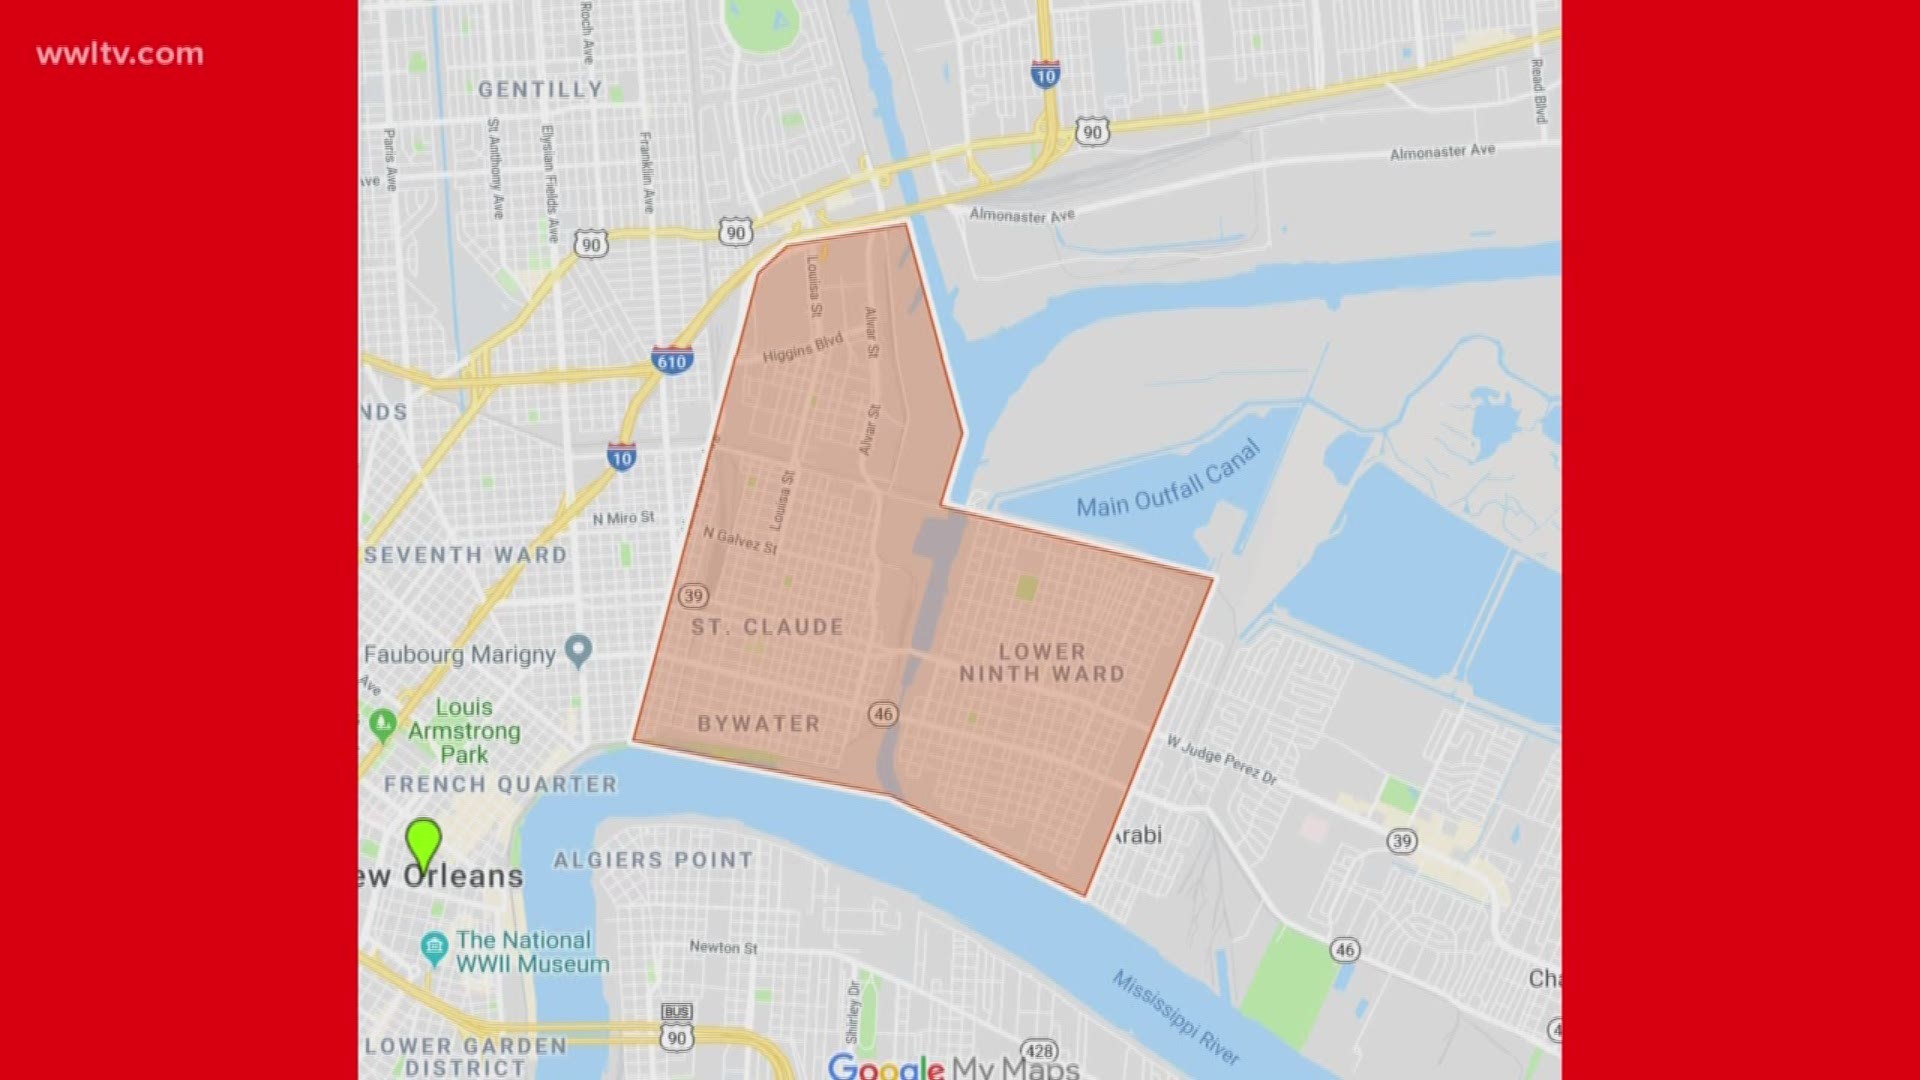 A precautionary boil water advisory has been issued for the Lower 9th Ward and parts of St. Claude, Bywater Florida and Desire areas.